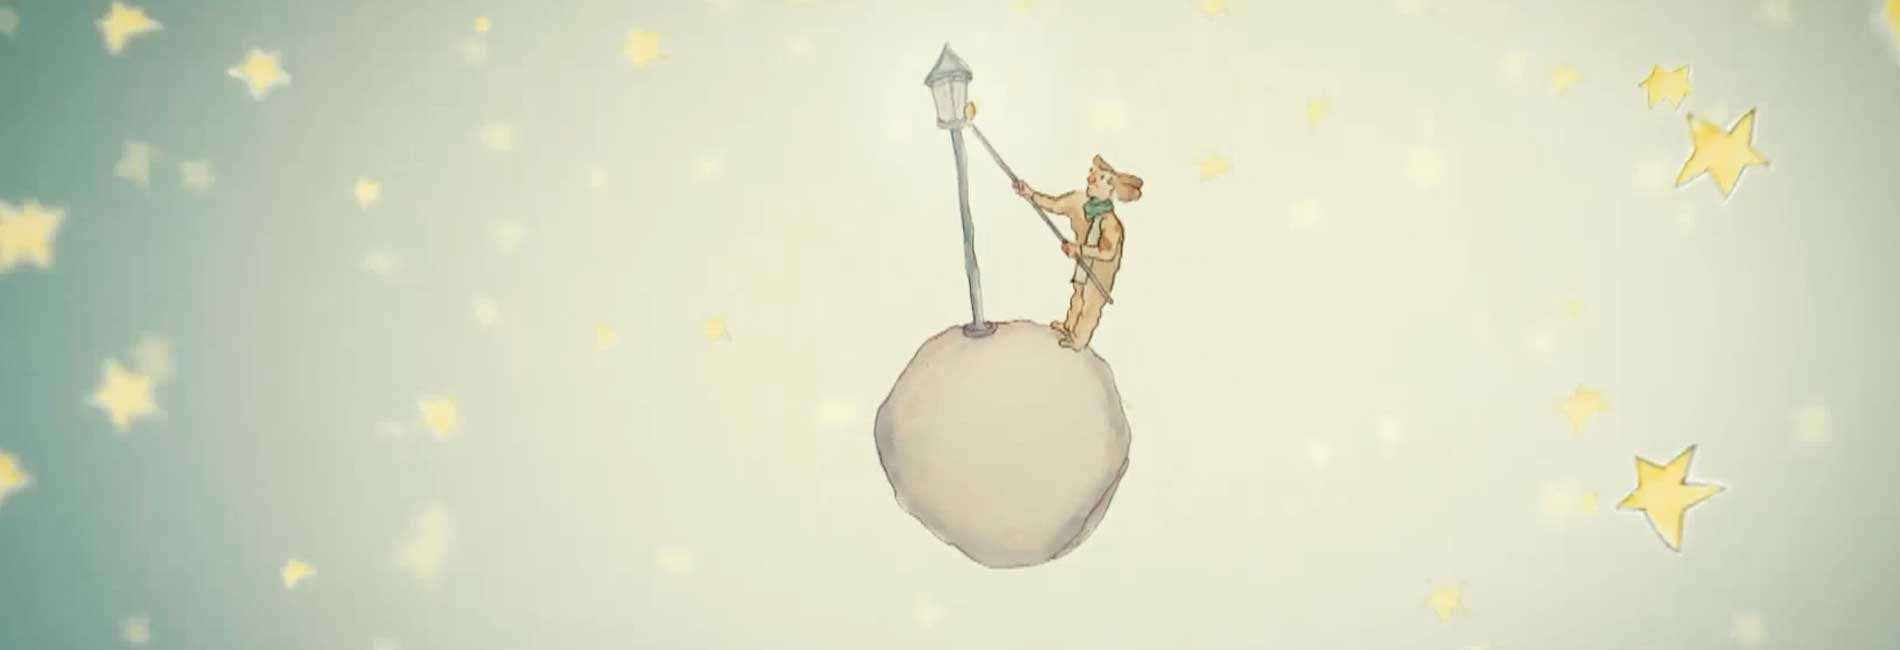 The Little Prince 3-هاشور